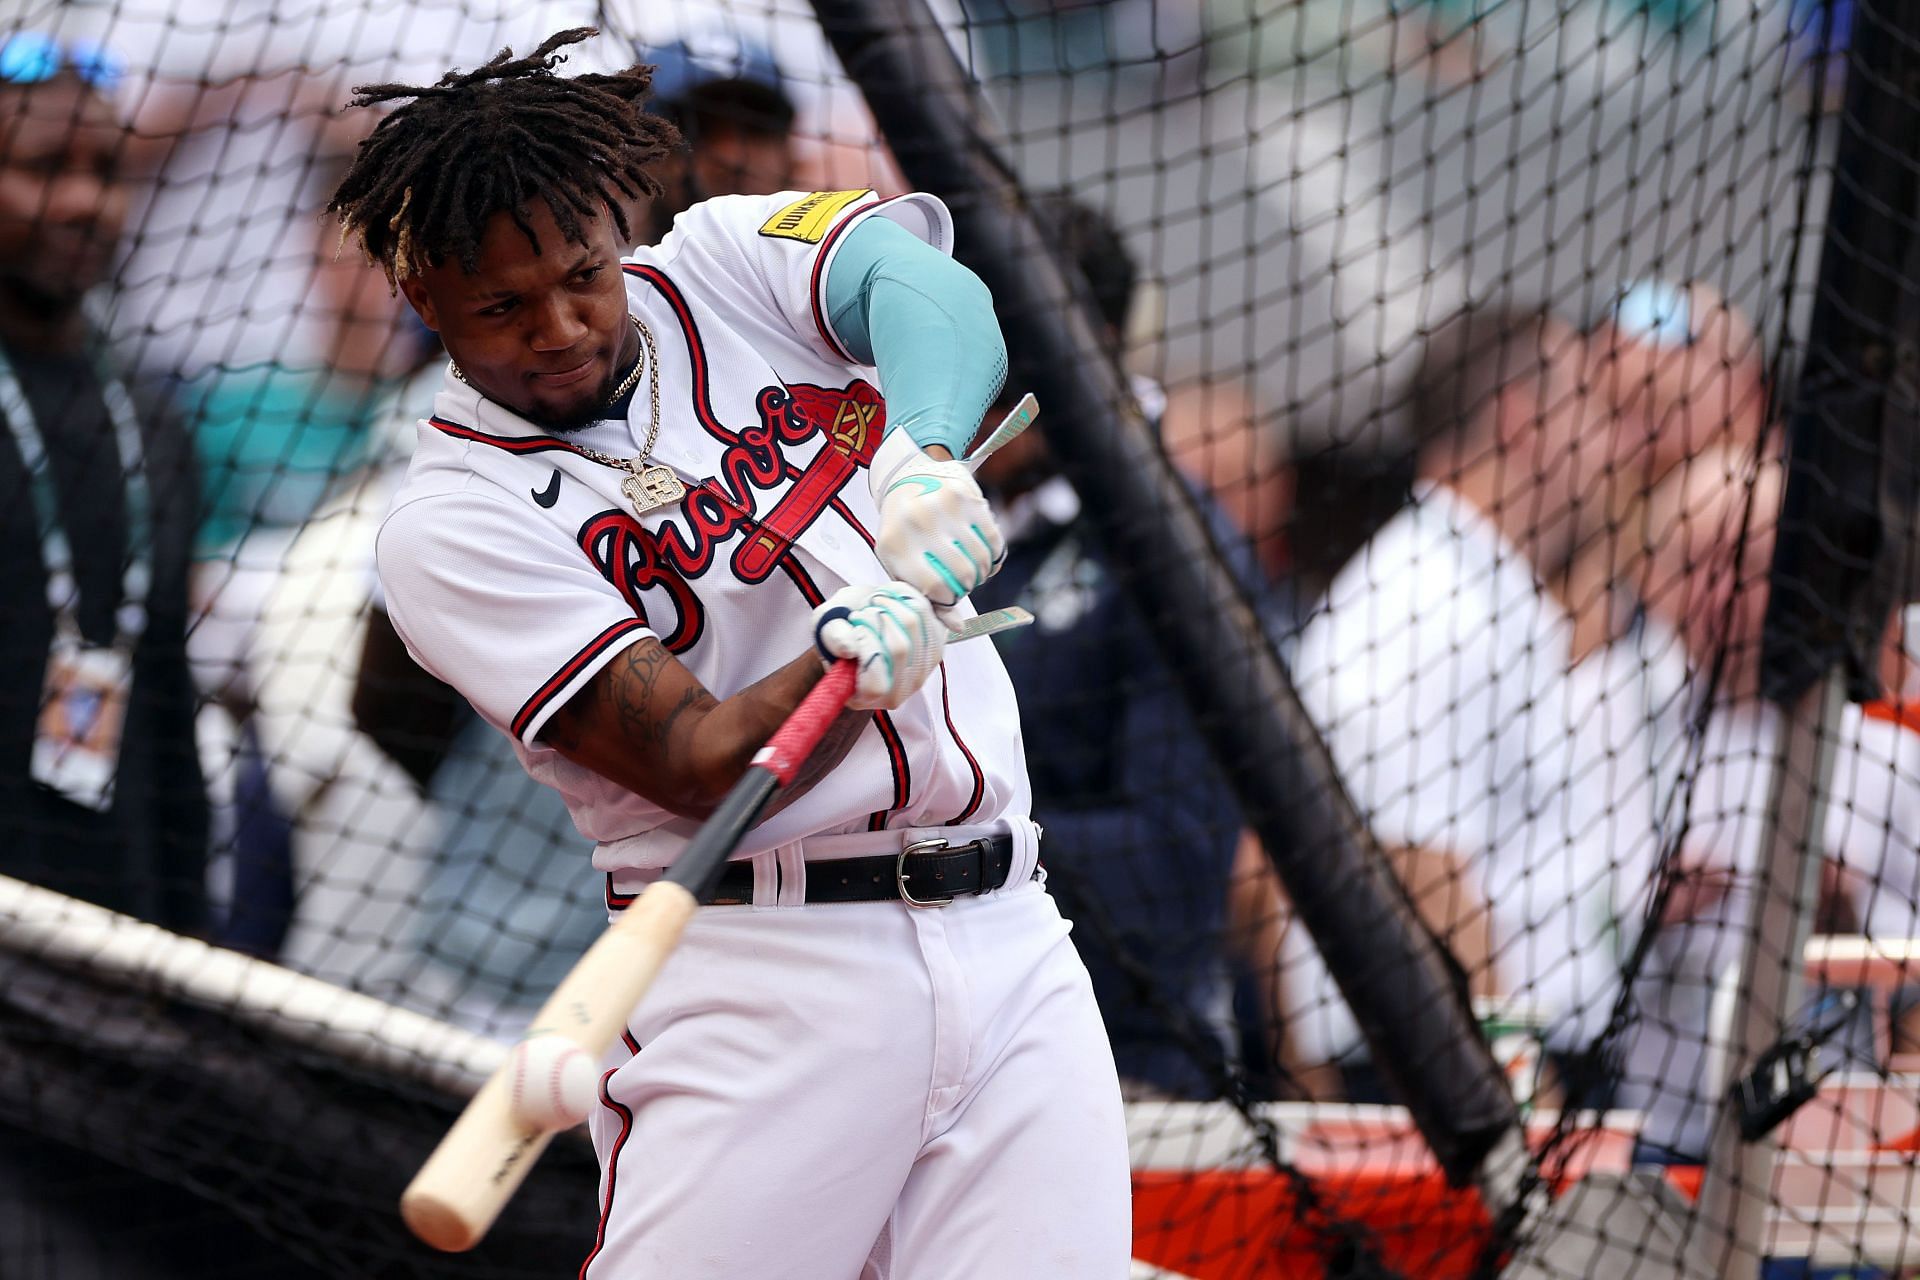 Ronald Acu&ntilde;a Jr. of the Atlanta Braves bats during Gatorade All-Star Workout Day at T-Mobile Park on Monday in Seattle, Washington.